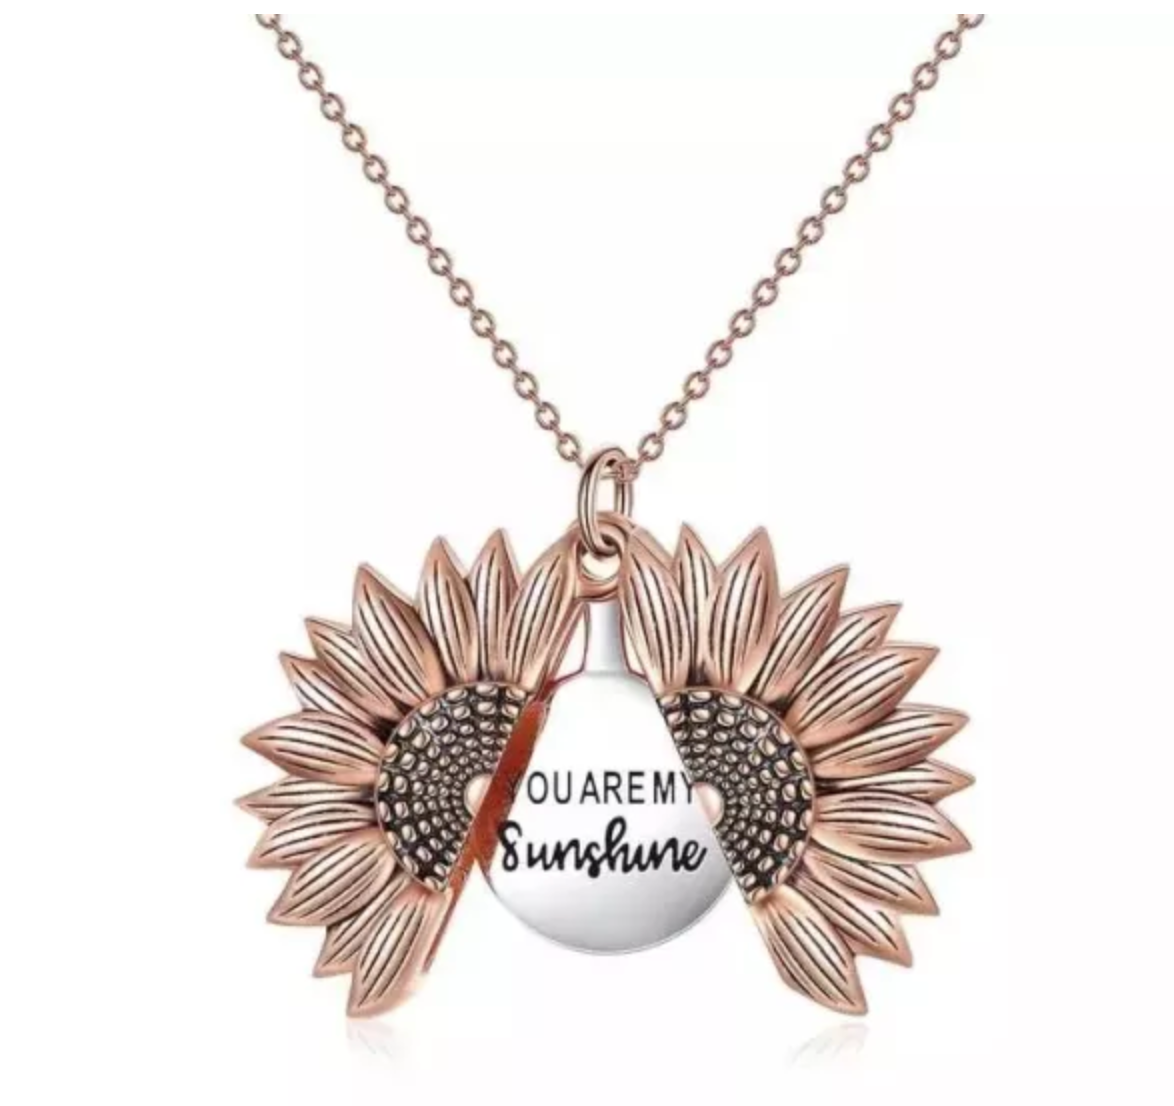 You are my Sunshine Sunflower Necklace